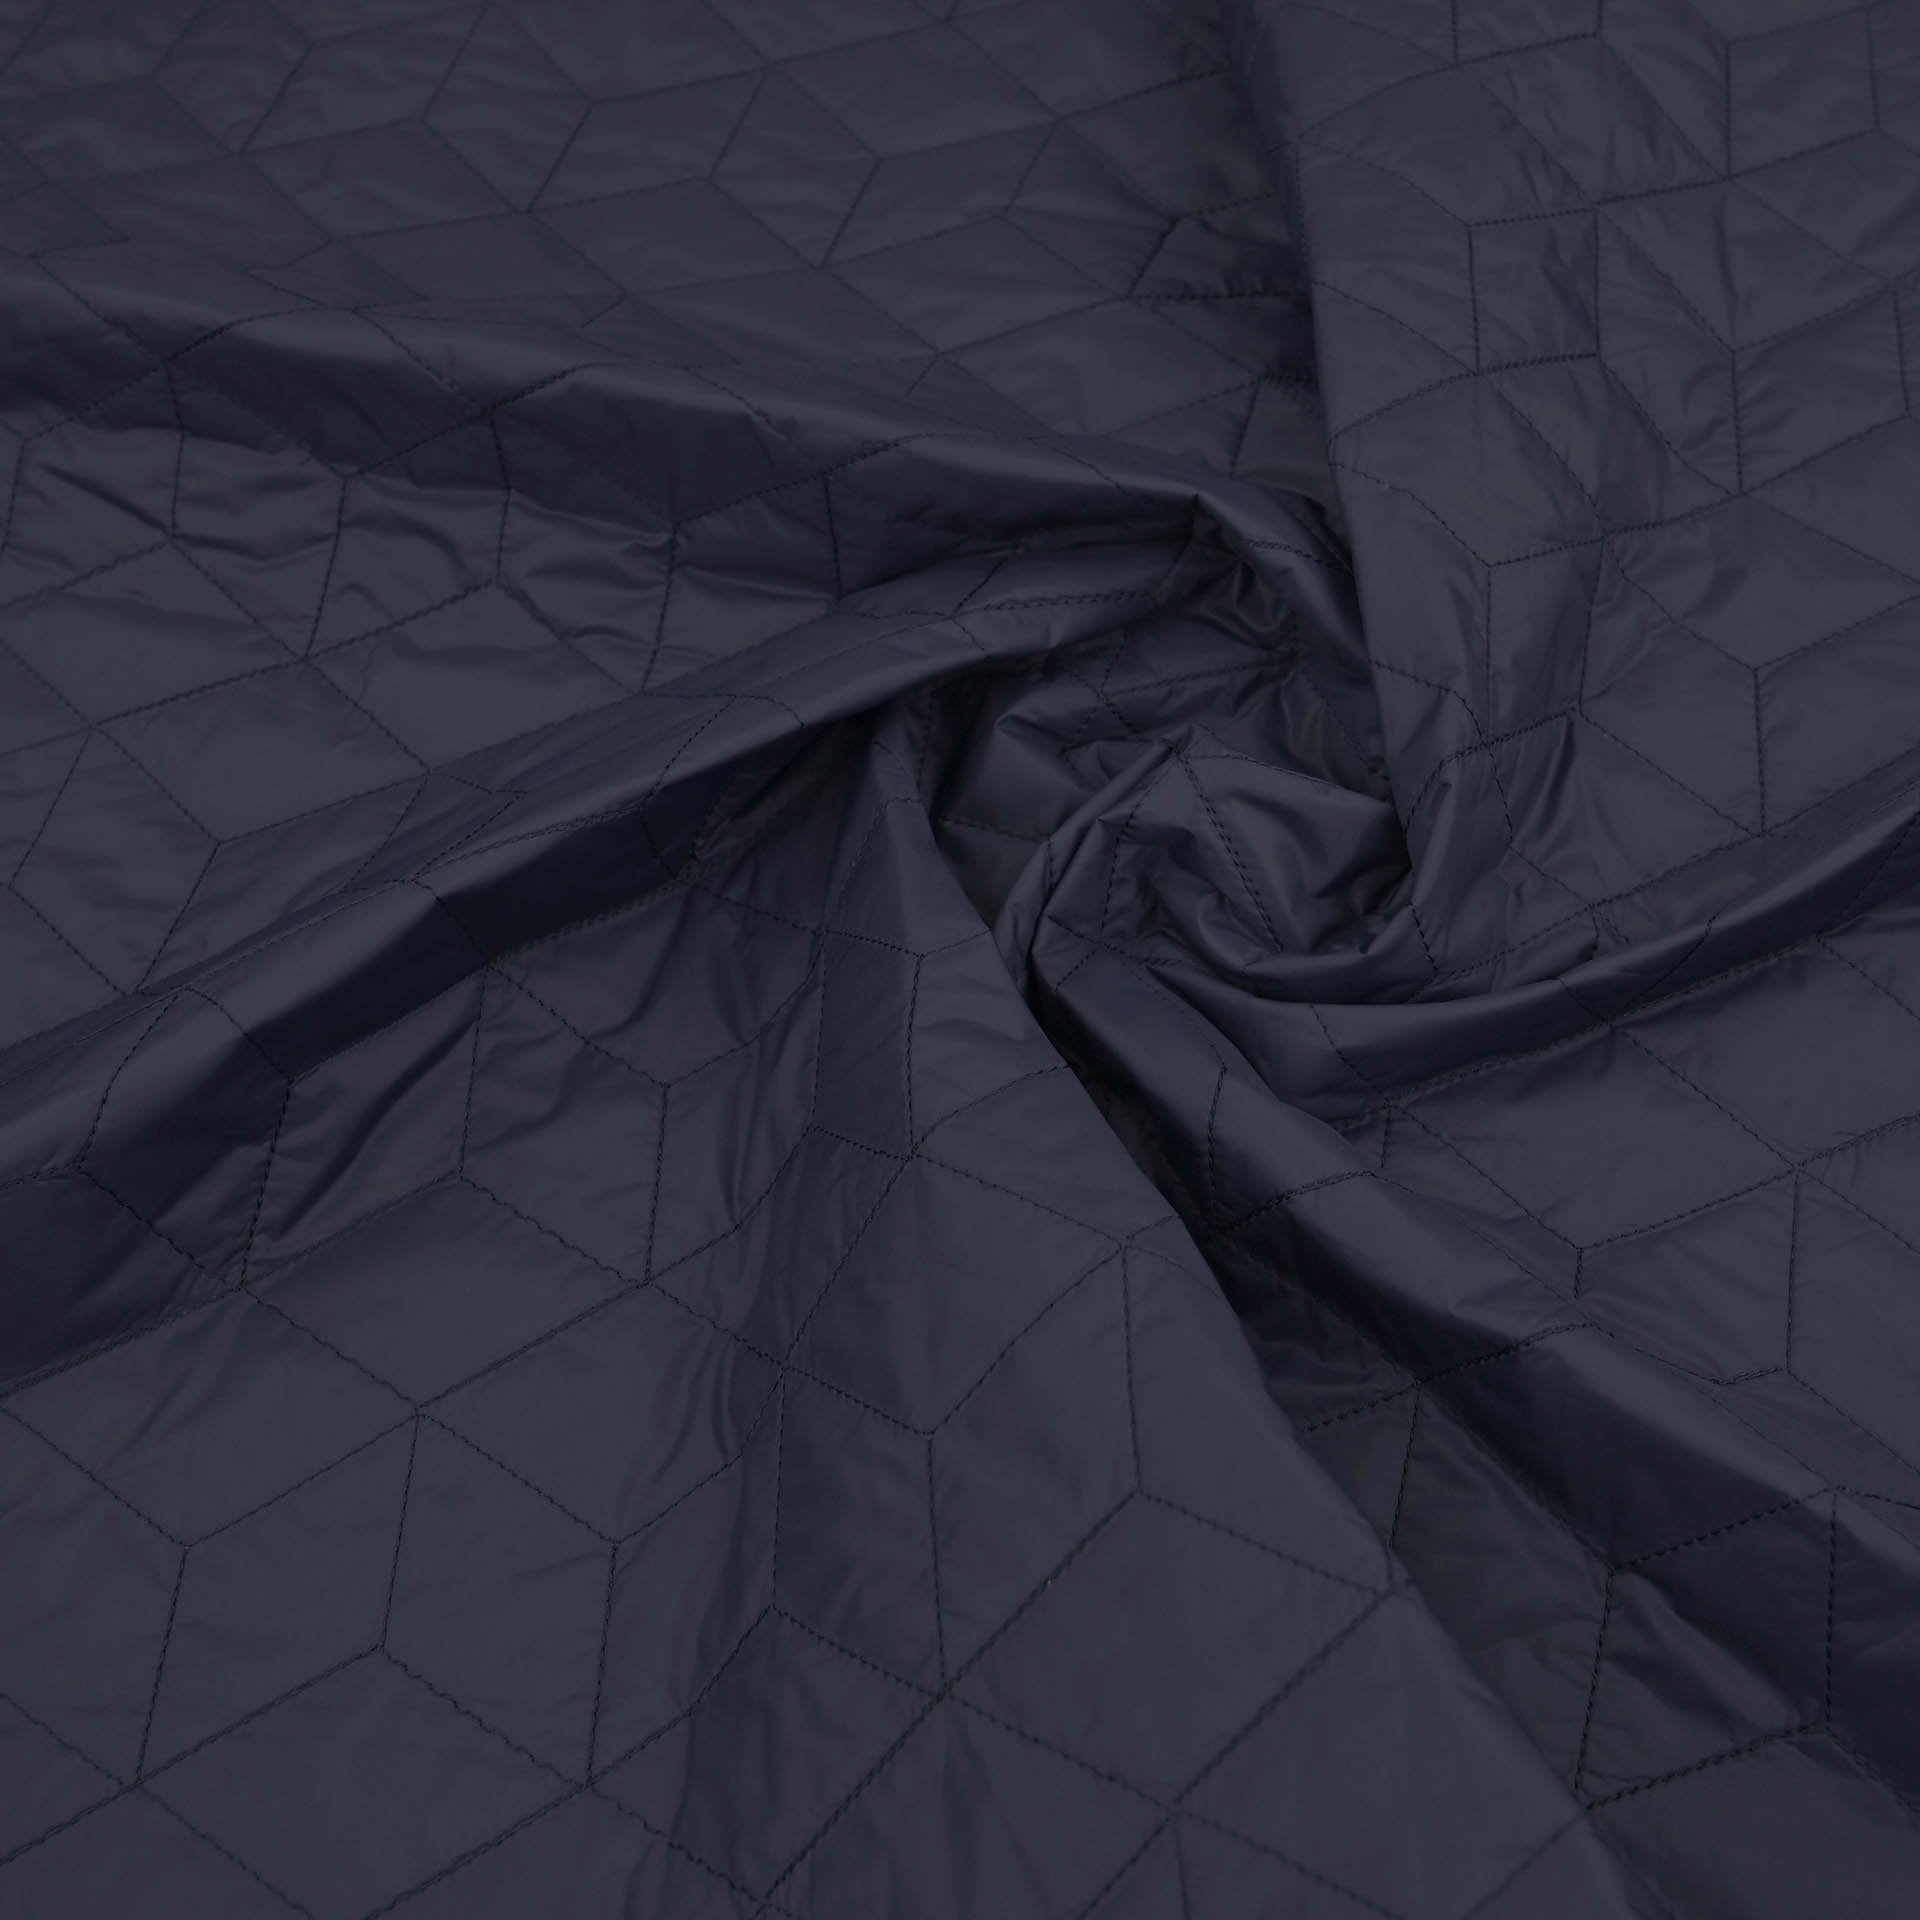 Navy Quilted Fabric 4569